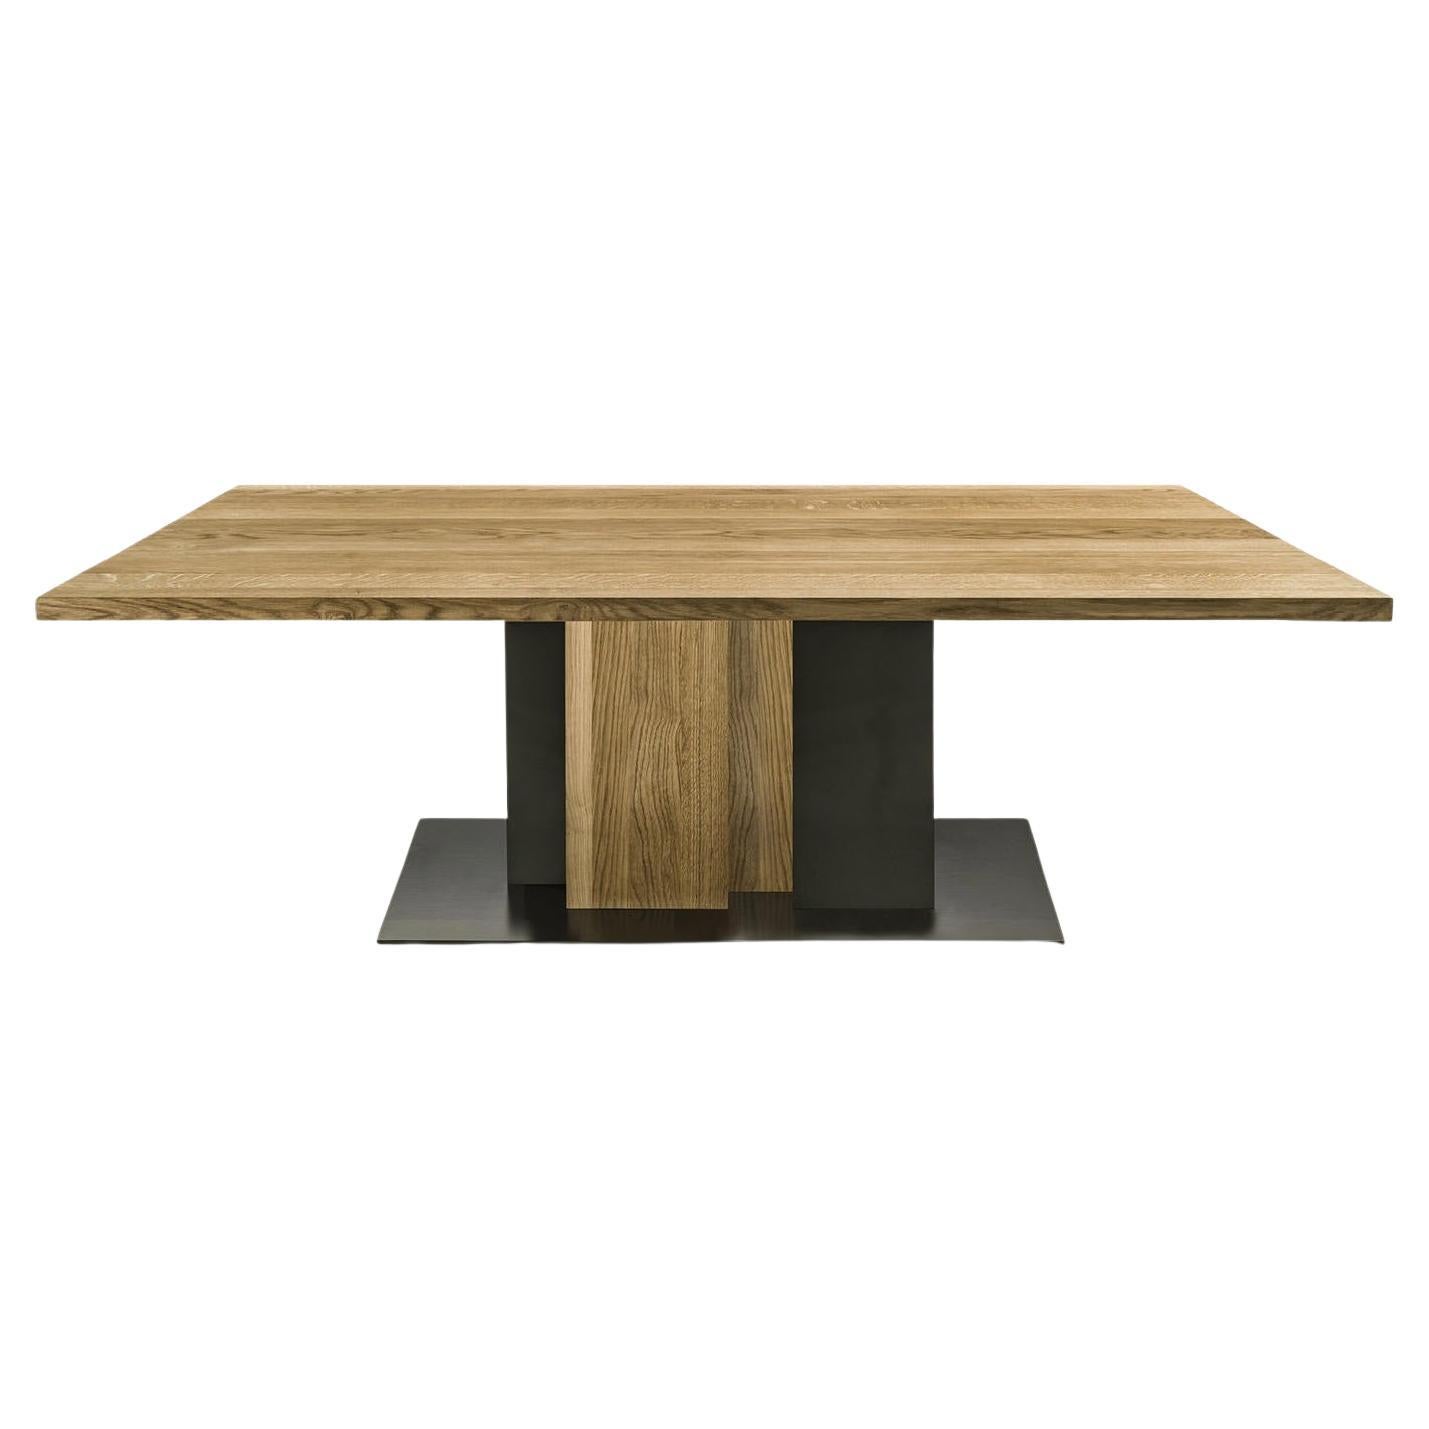 Rectangular Table Made to Order in Solid Oak with Knots & Lacquered Iron